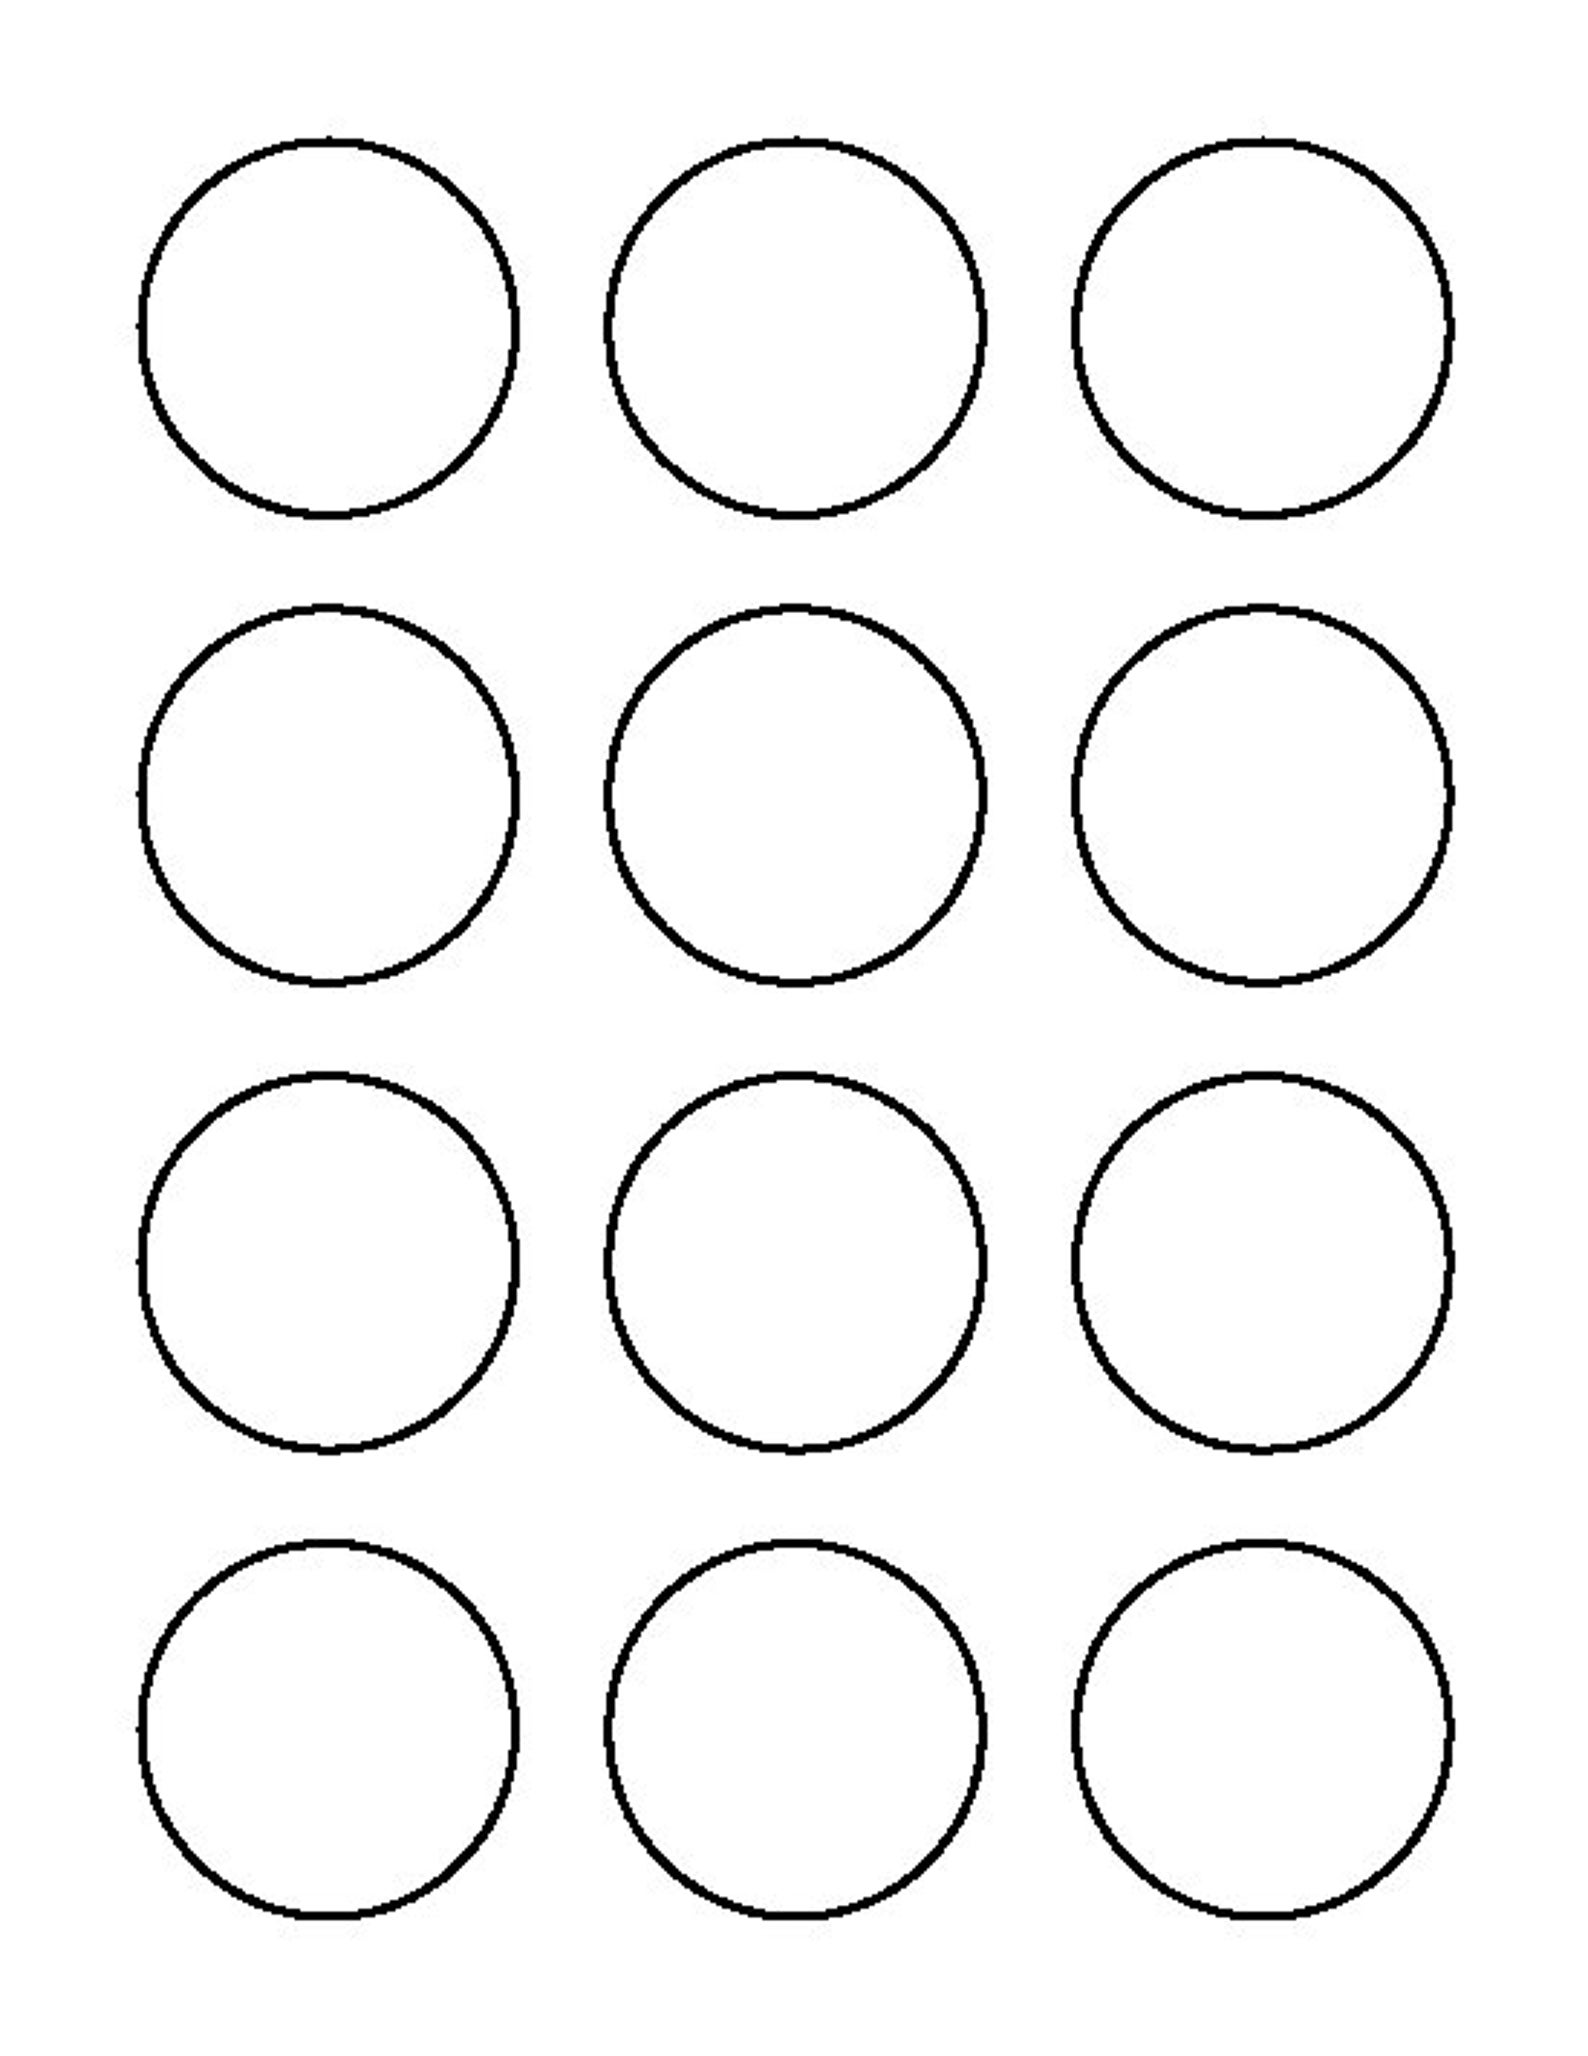 circle-template-sticker-labels-2-inch-round-labels-printable-labels